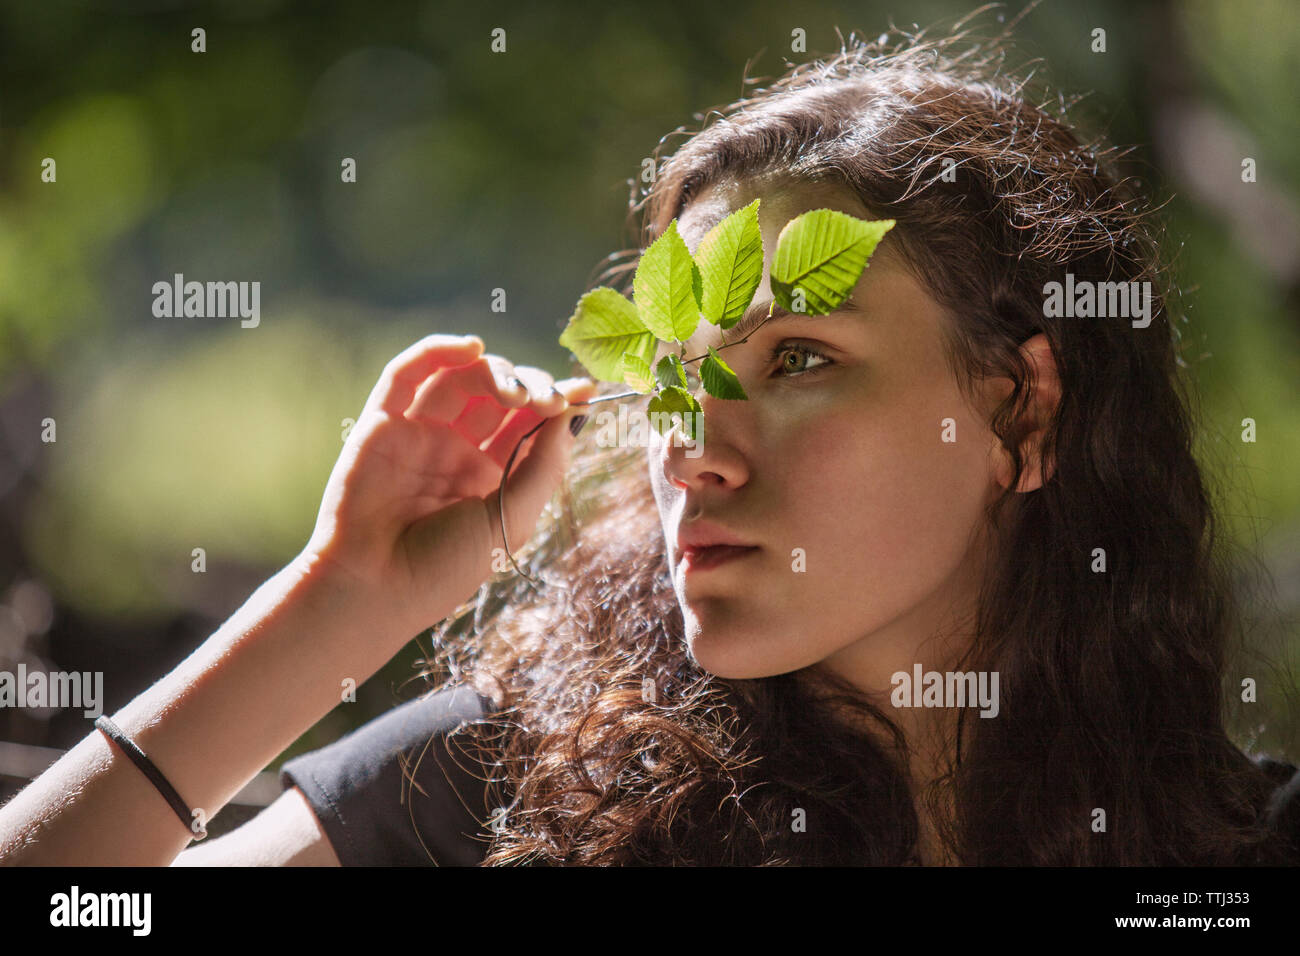 Teenage girl looking away while holding plant stem Stock Photo